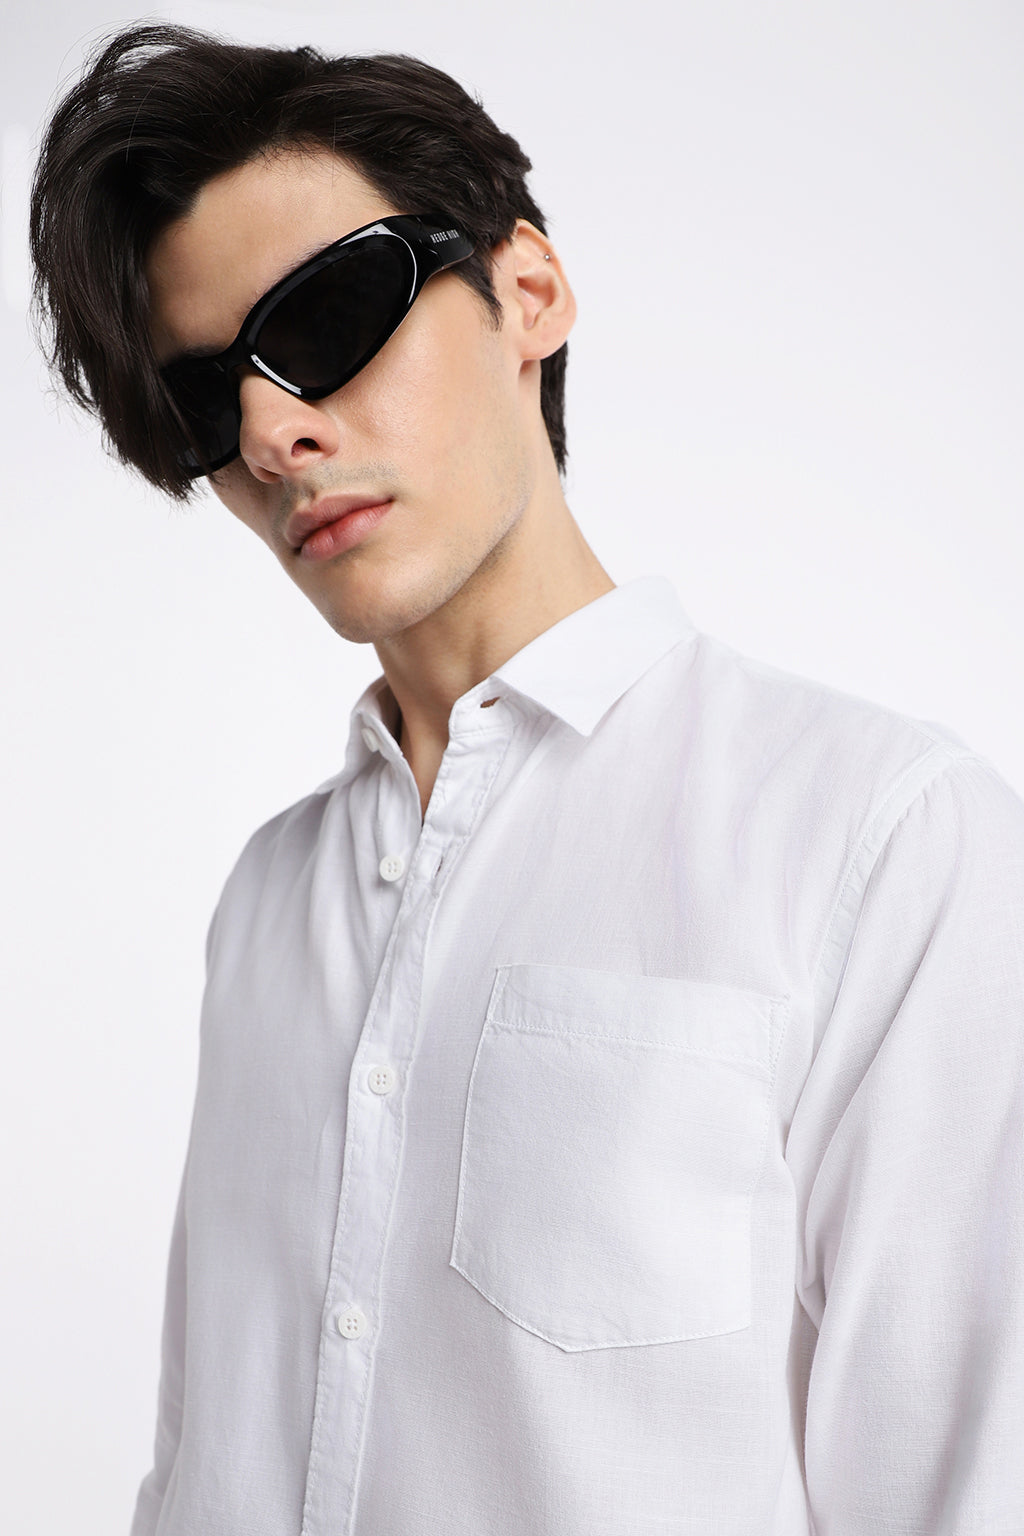 SOLID WHITE COTTON SHIRT